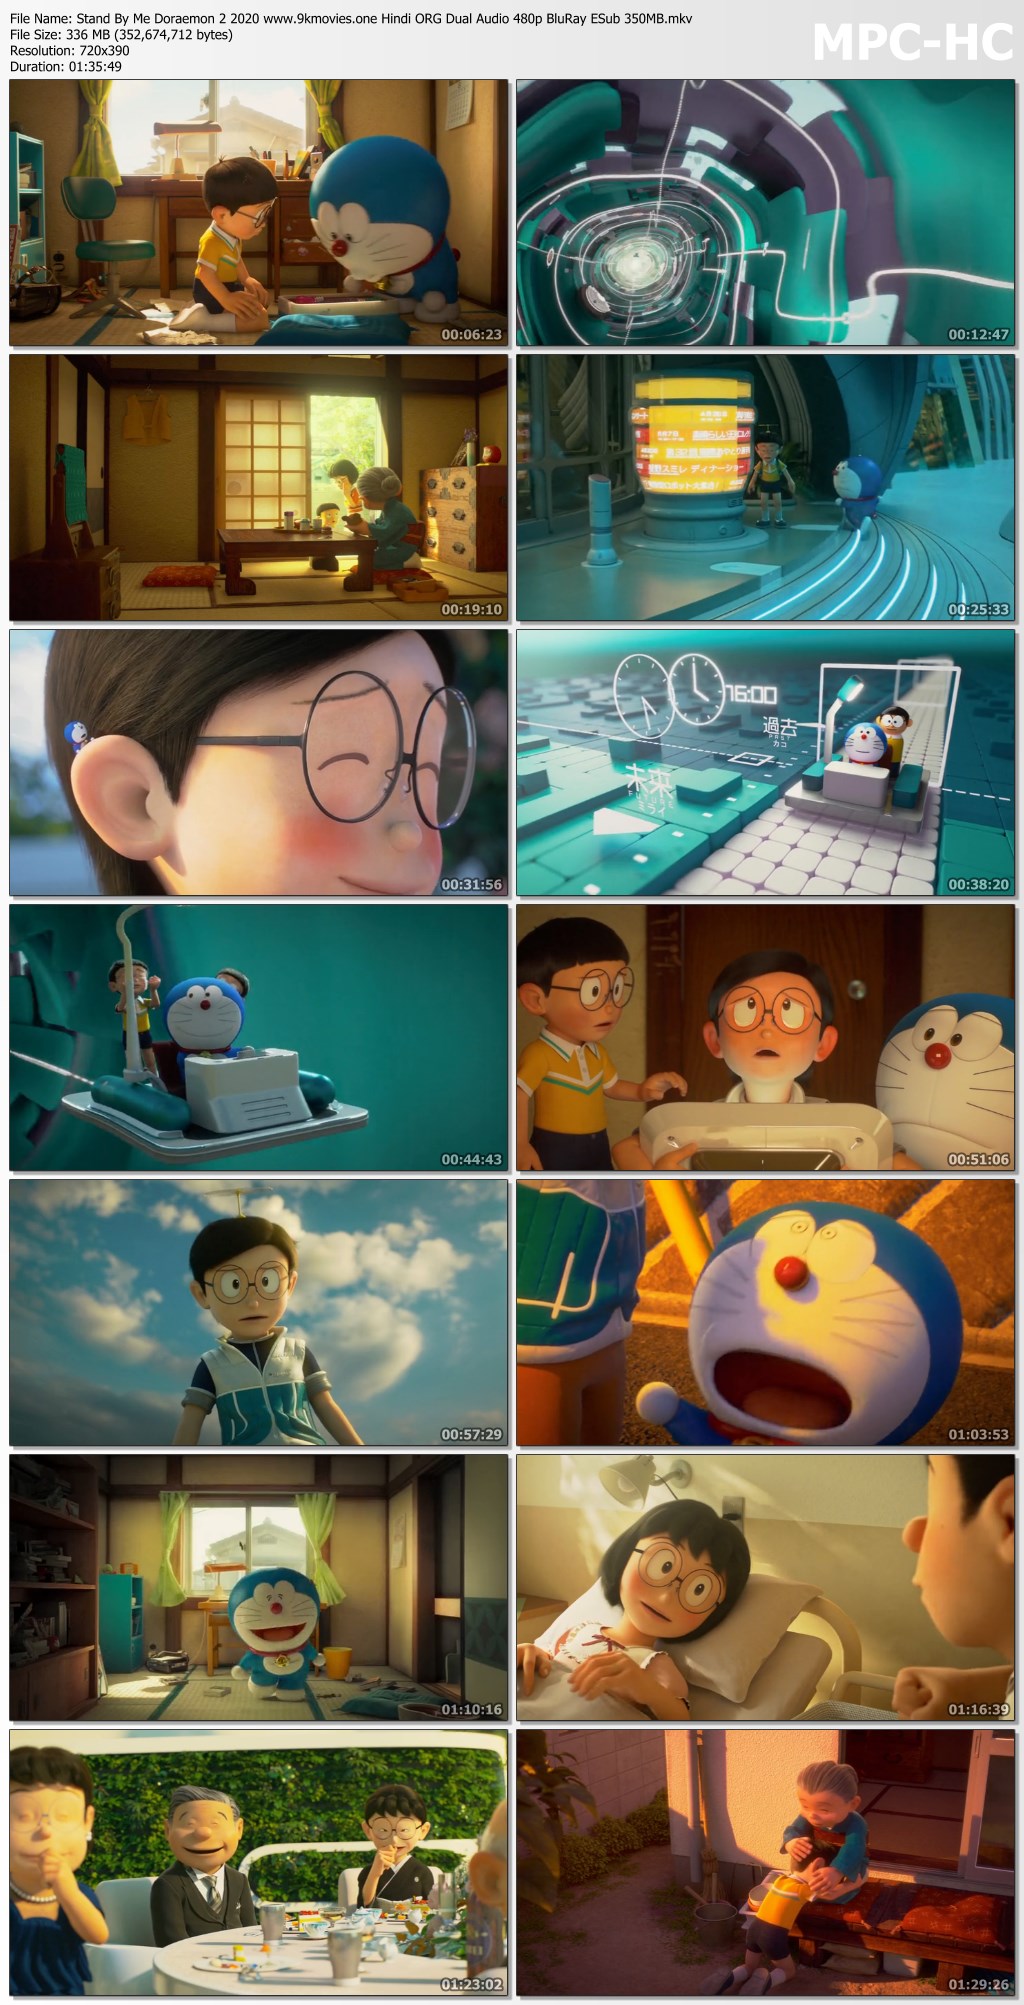 Download Stand by Me Doraemon 2 (2020) Hindi Dubbed (ORG 5.1 DD) [Dual Audio] WEB-DL 1080p 720p 480p [HD] download in HD